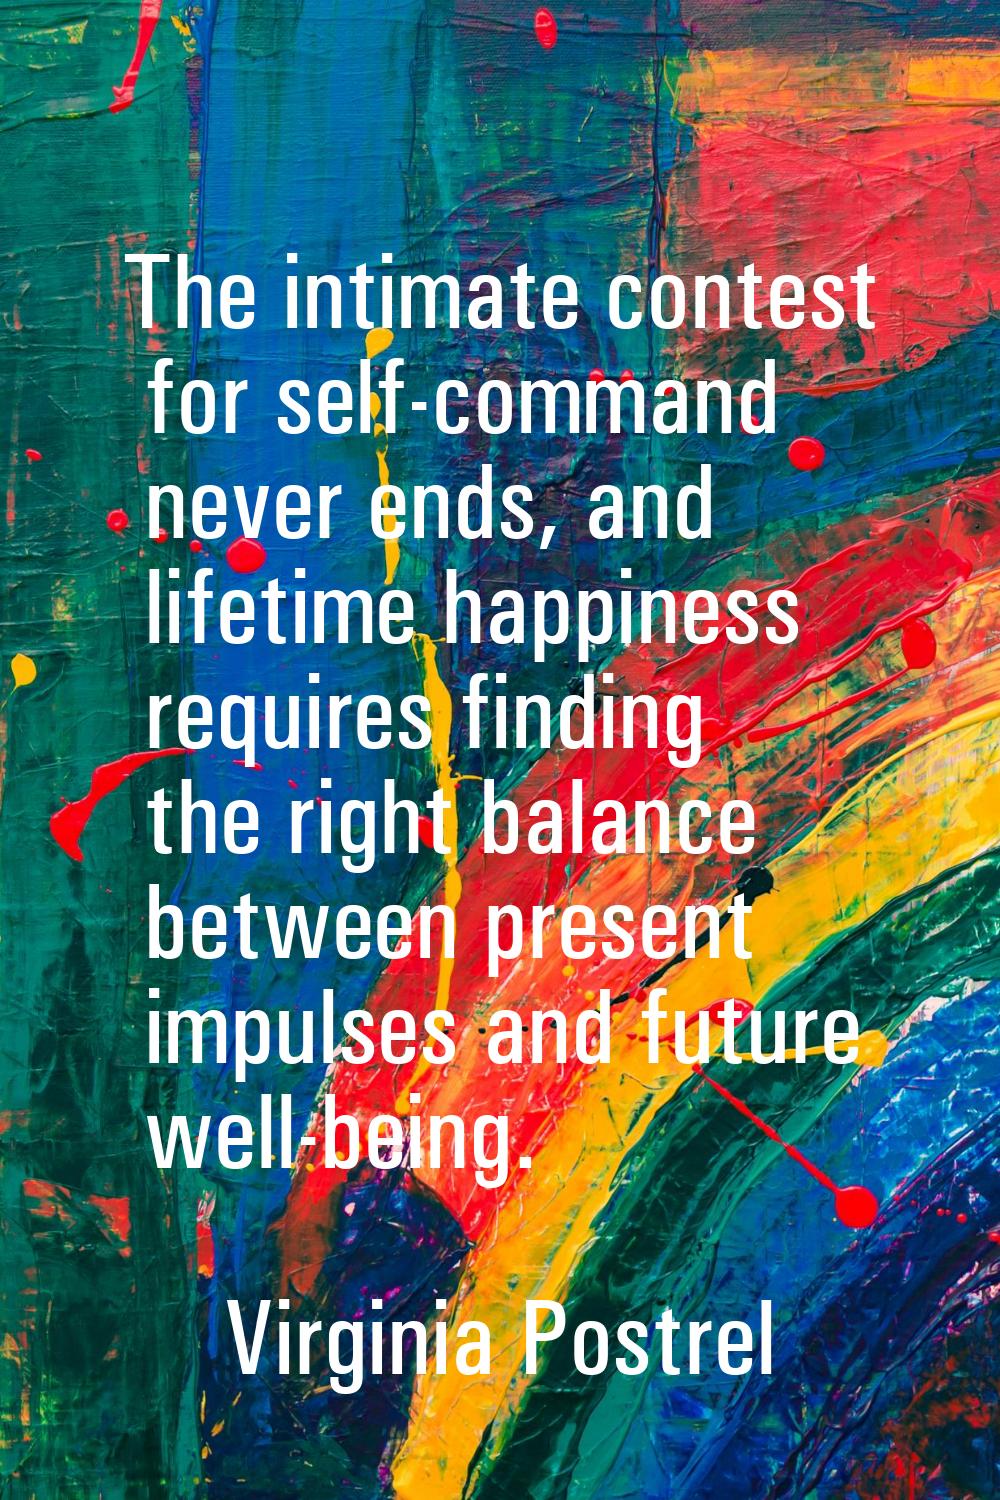 The intimate contest for self-command never ends, and lifetime happiness requires finding the right